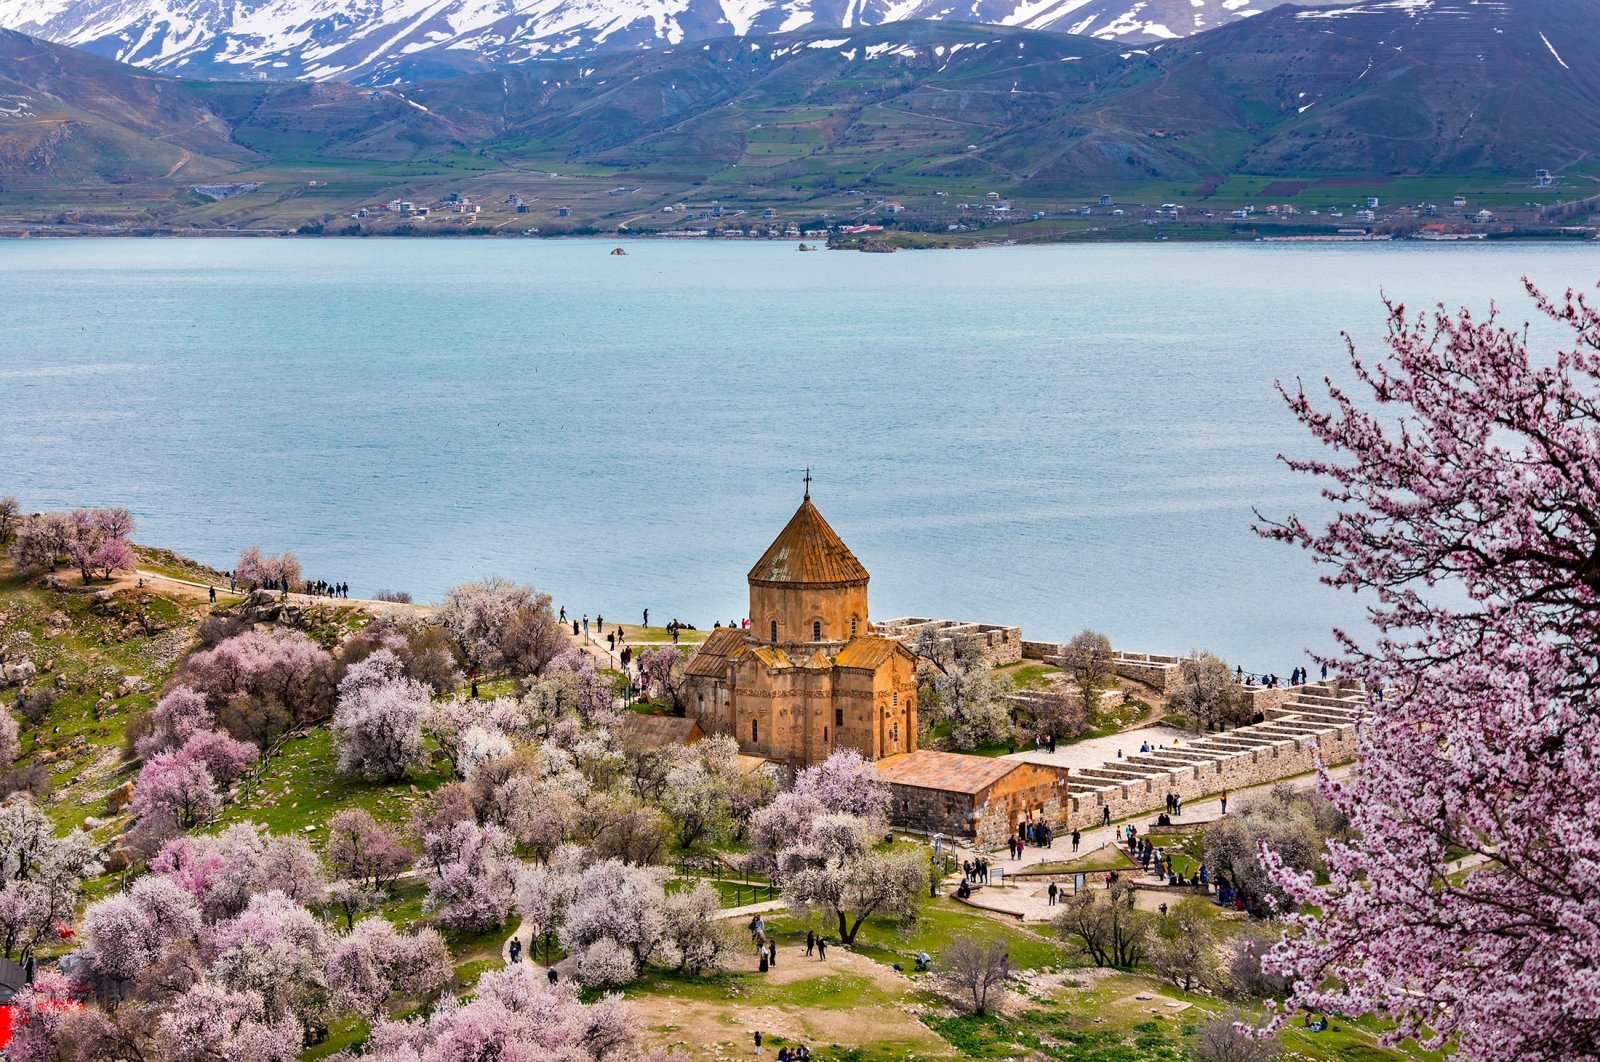 Akdamar Church is believed to contain a piece of the True Cross, which was thought to have been used in the crucifixion of Jesus Christ. (Shutterstock Photo)